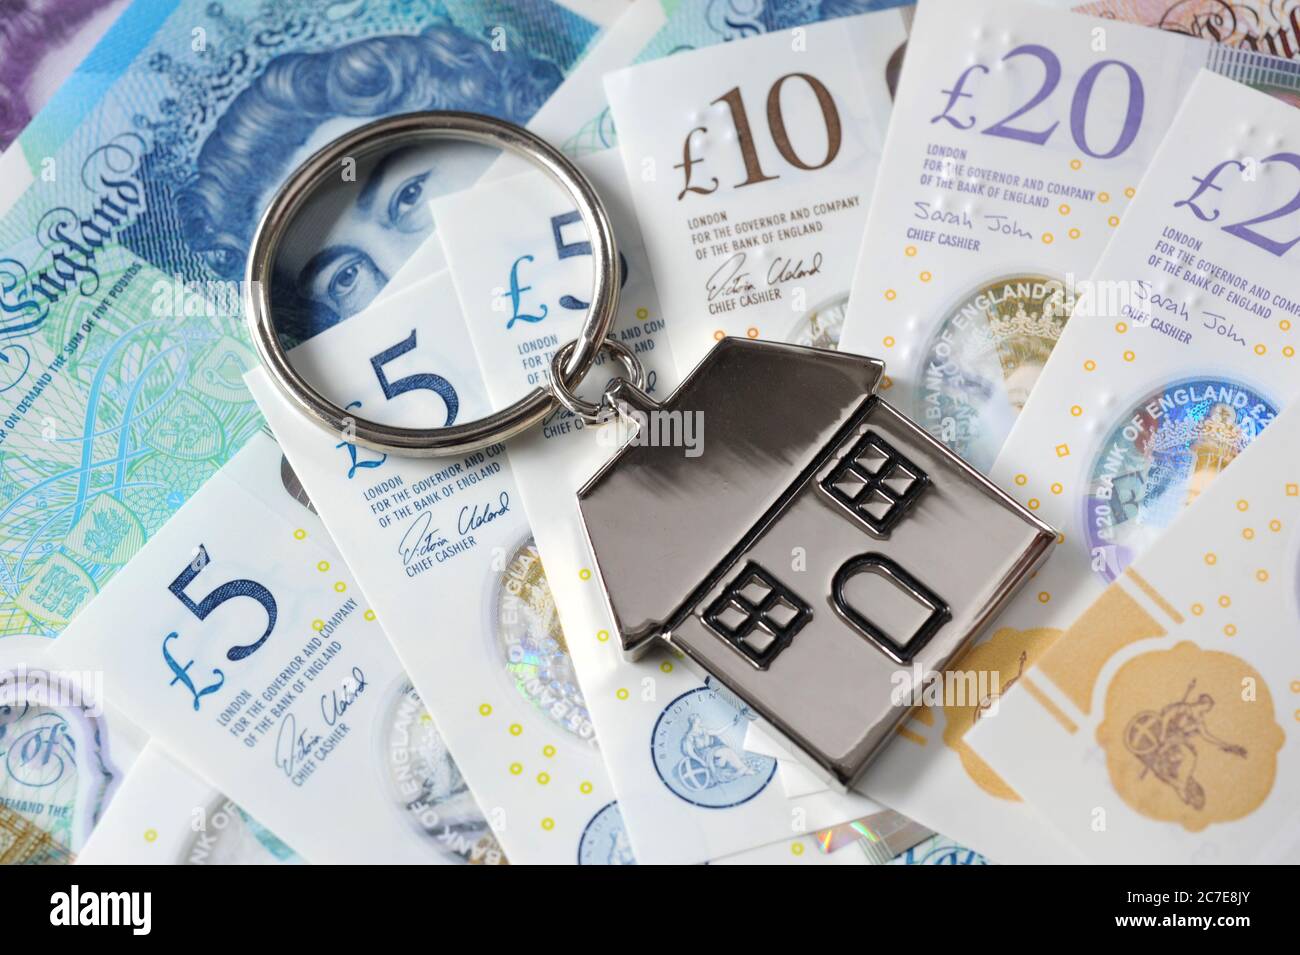 BRITISH MONEY CURRENCY WITH HOUSE KEY RING RE THE ECONOMY COVID 19 CORONAVIRUS CASH JOBS BANKS PENSIONS ETC UK Stock Photo